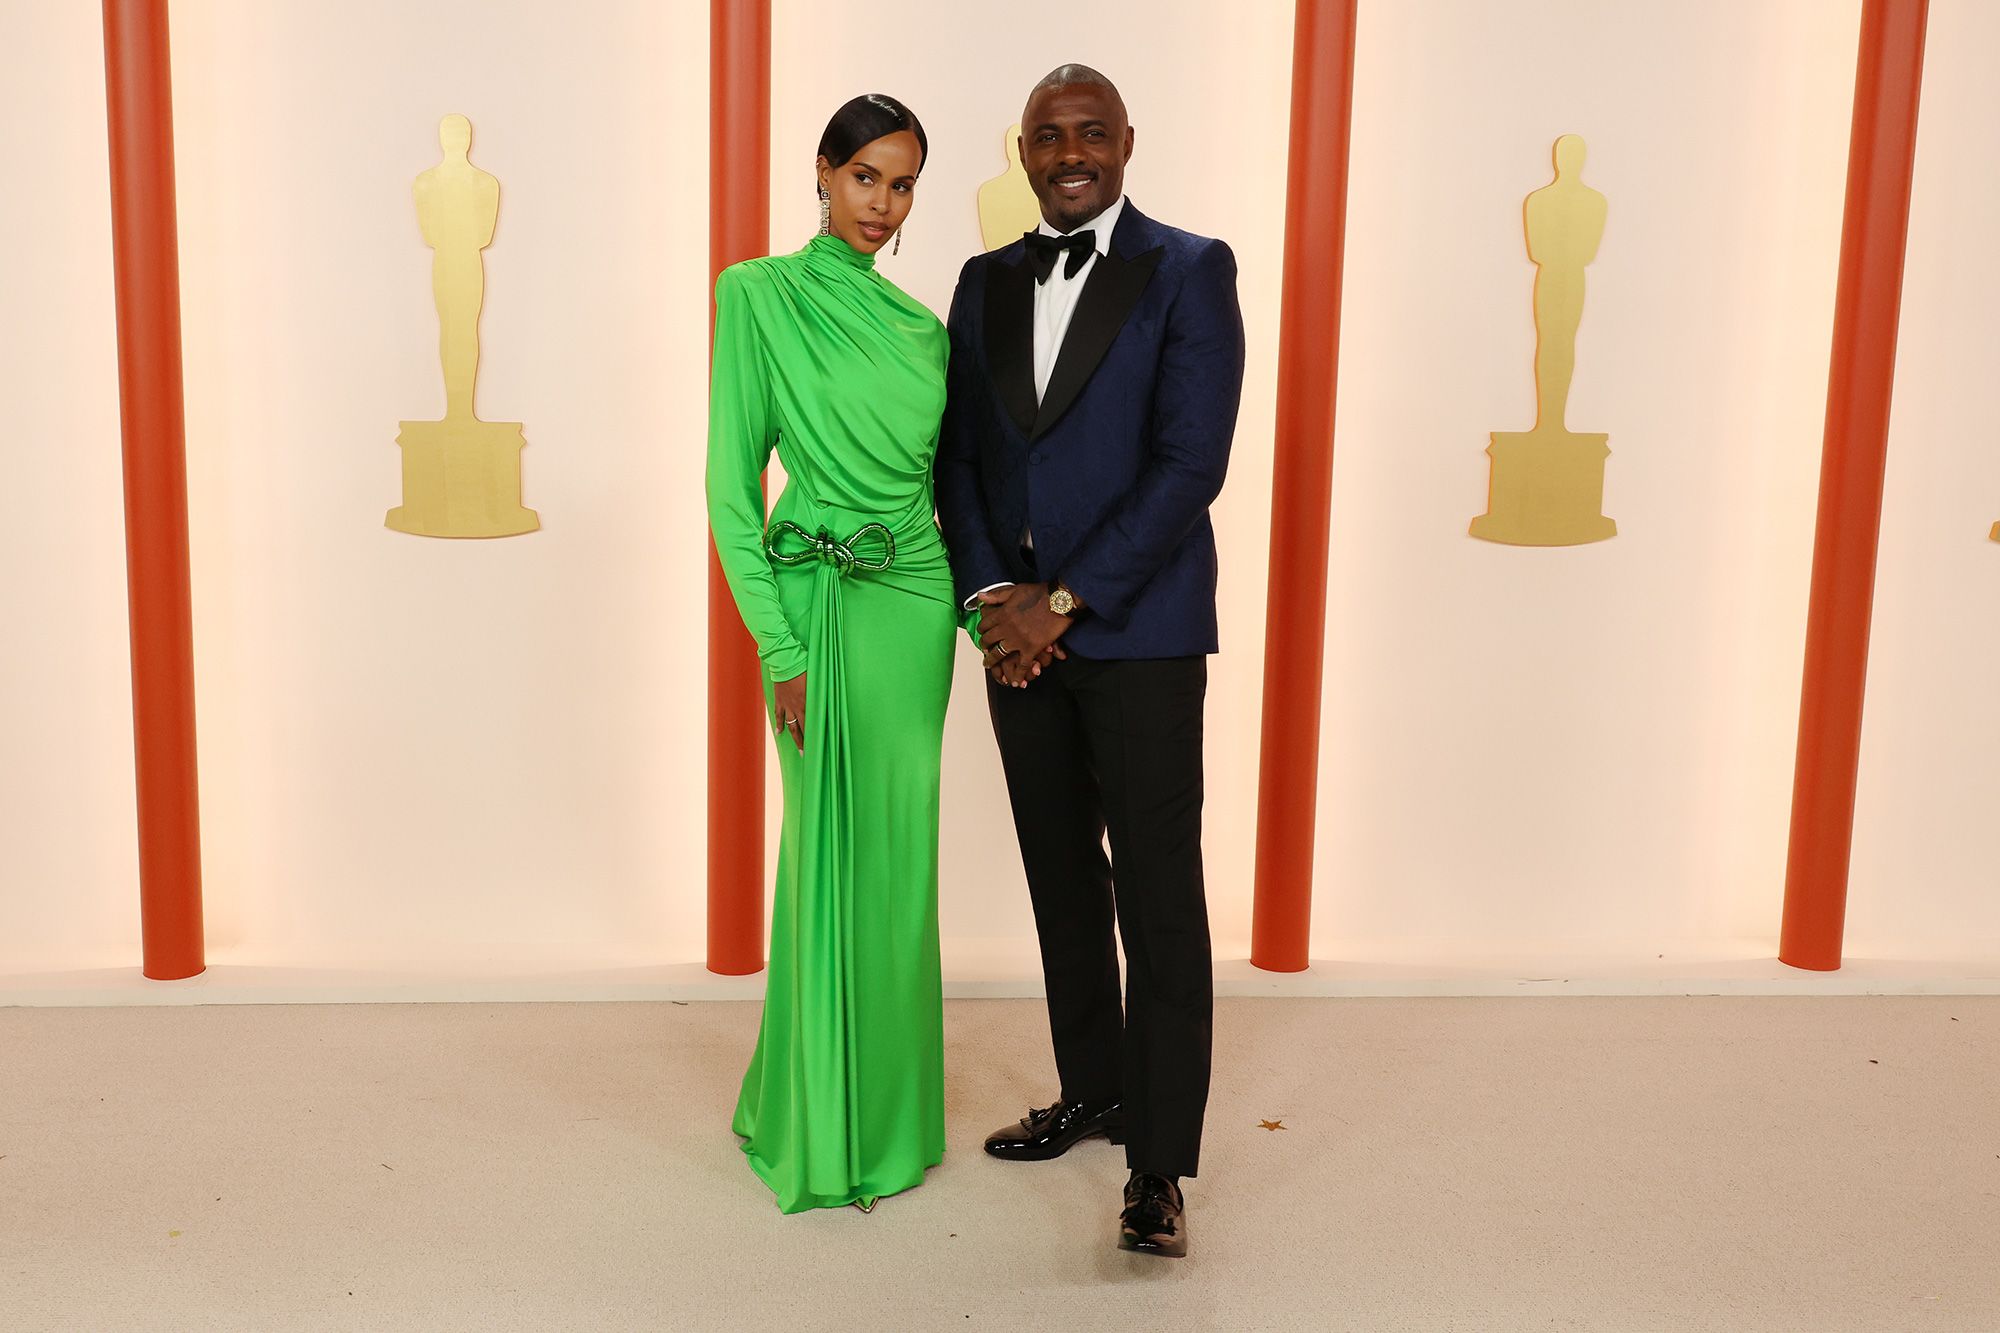 Oscars Red Carpet 2022: The Academy Awards 2022 Style Trend Is the Dramatic  Red Dress—See Pics